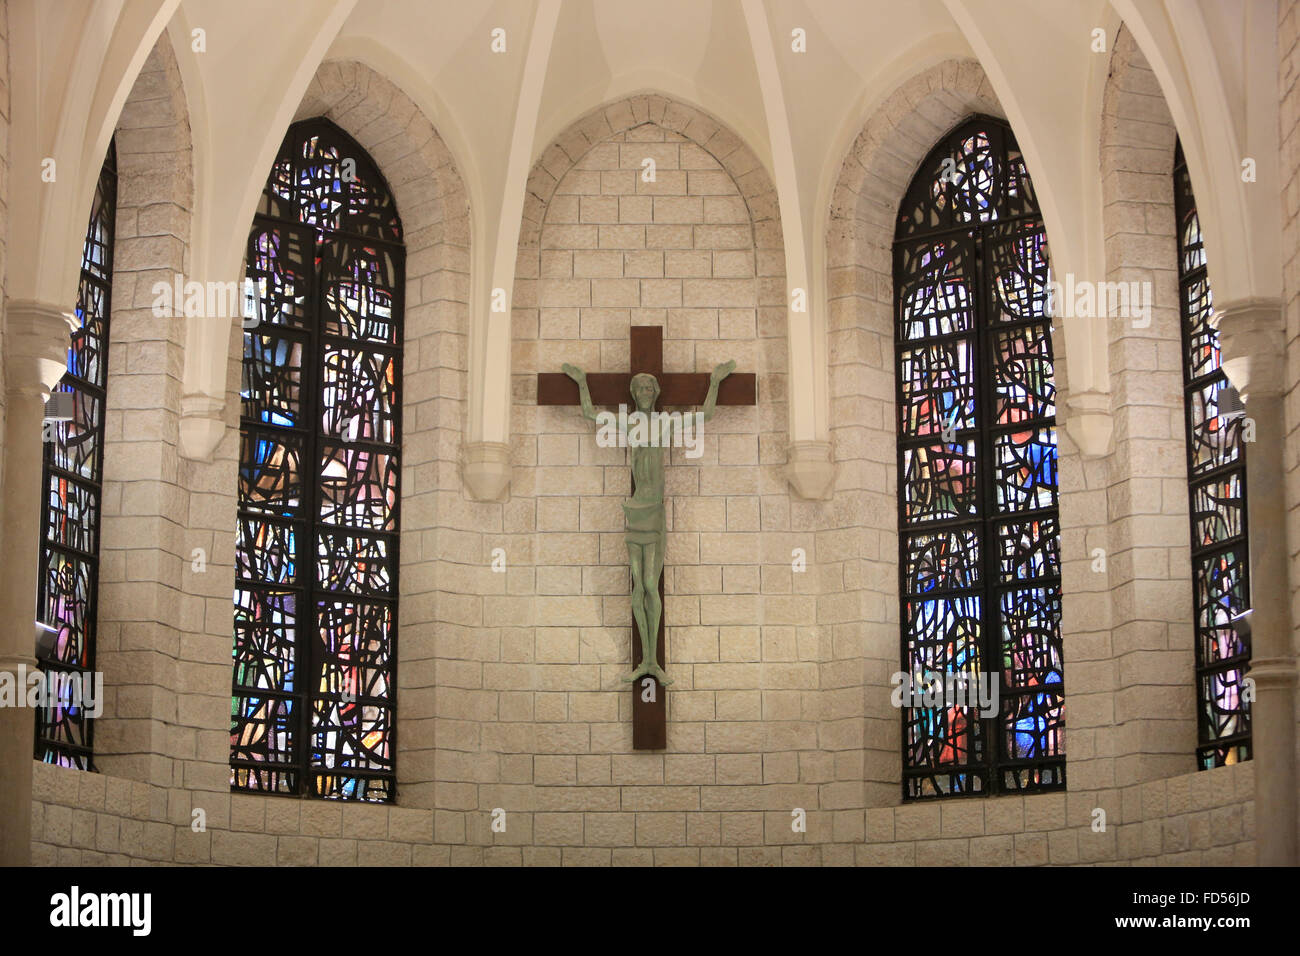 Jesus Christ on the cross. Sisters of Nazareth Convent. Stock Photo